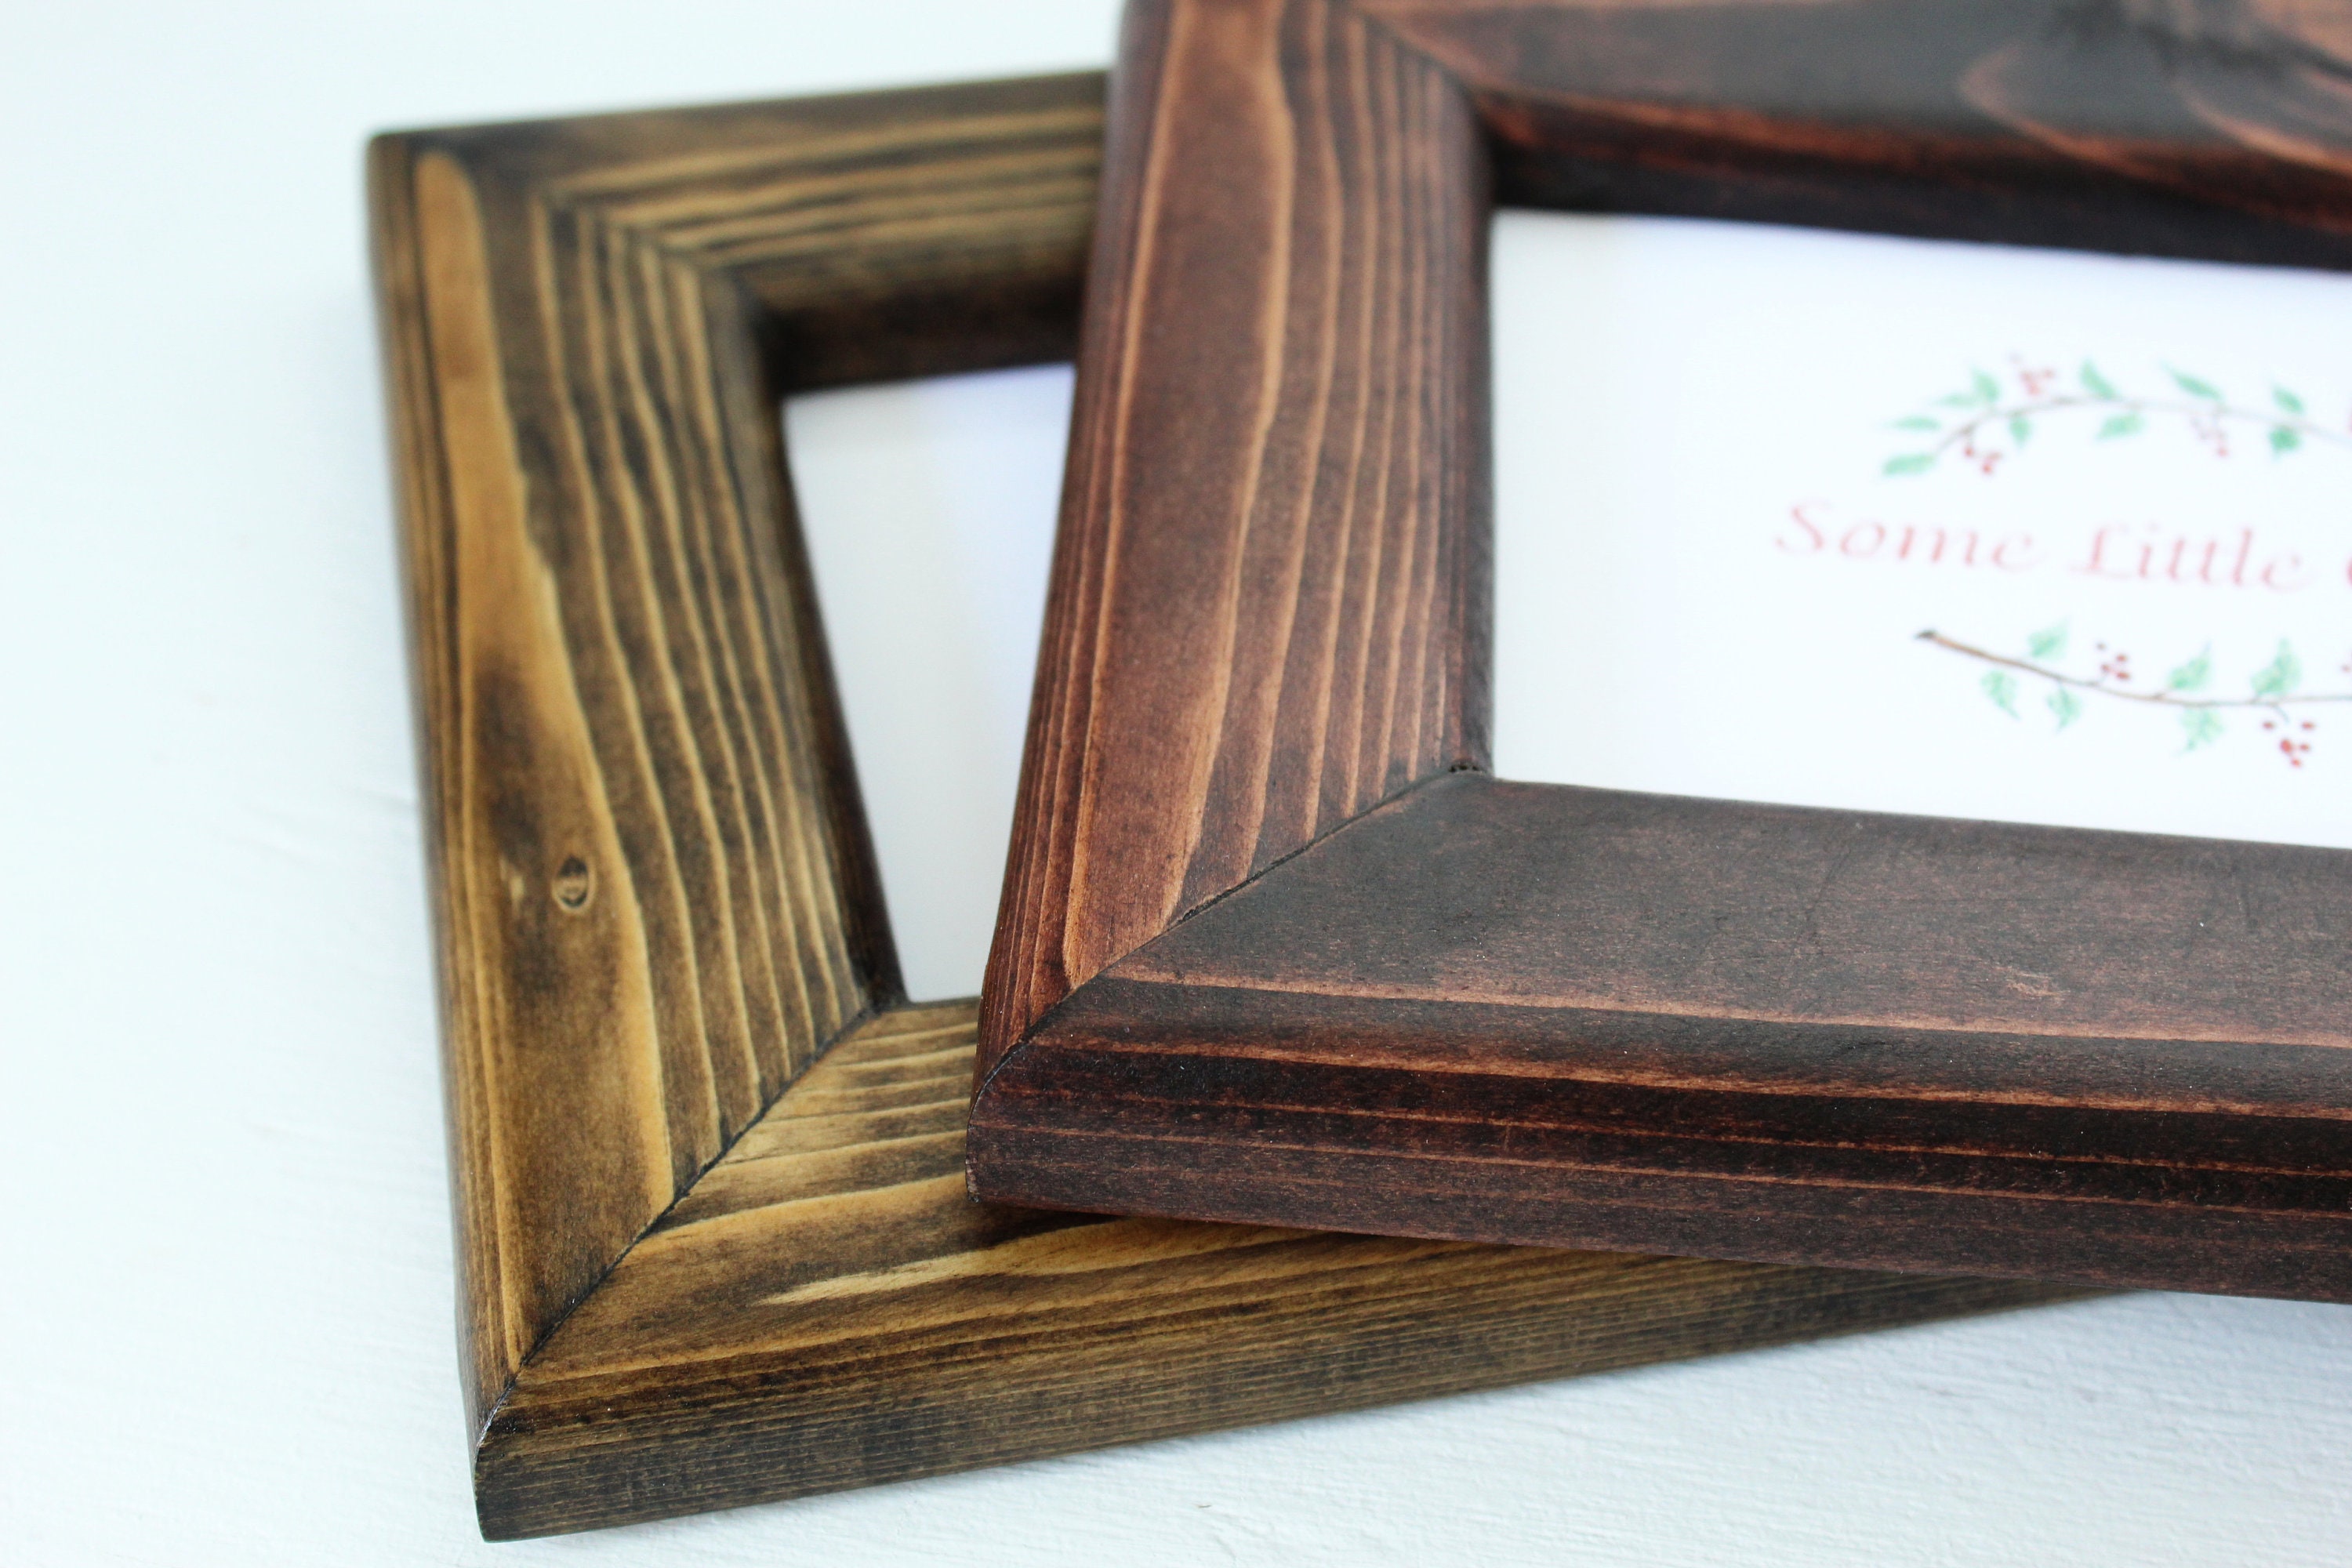 DDaoty Black 4x6 Picture Frame Rustic Solid Wood 2 Pcs High Definition Real  Glass, 4x6 Frames Tabletop or Wall Display